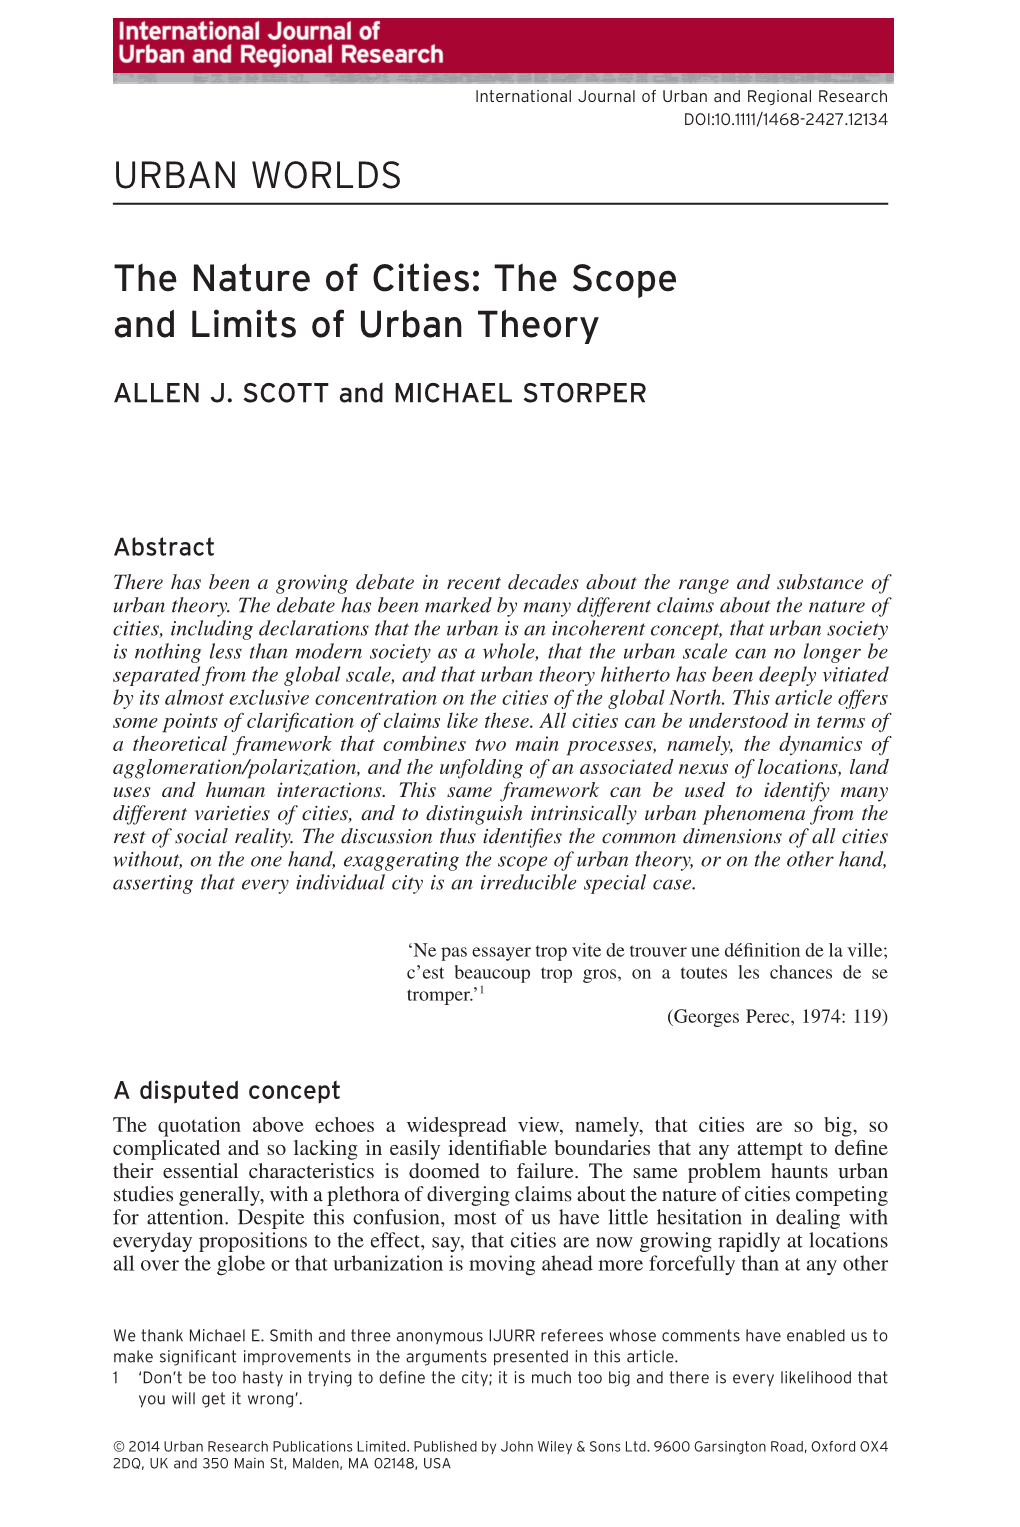 The Nature of Cities: the Scope and Limits of Urban Theory